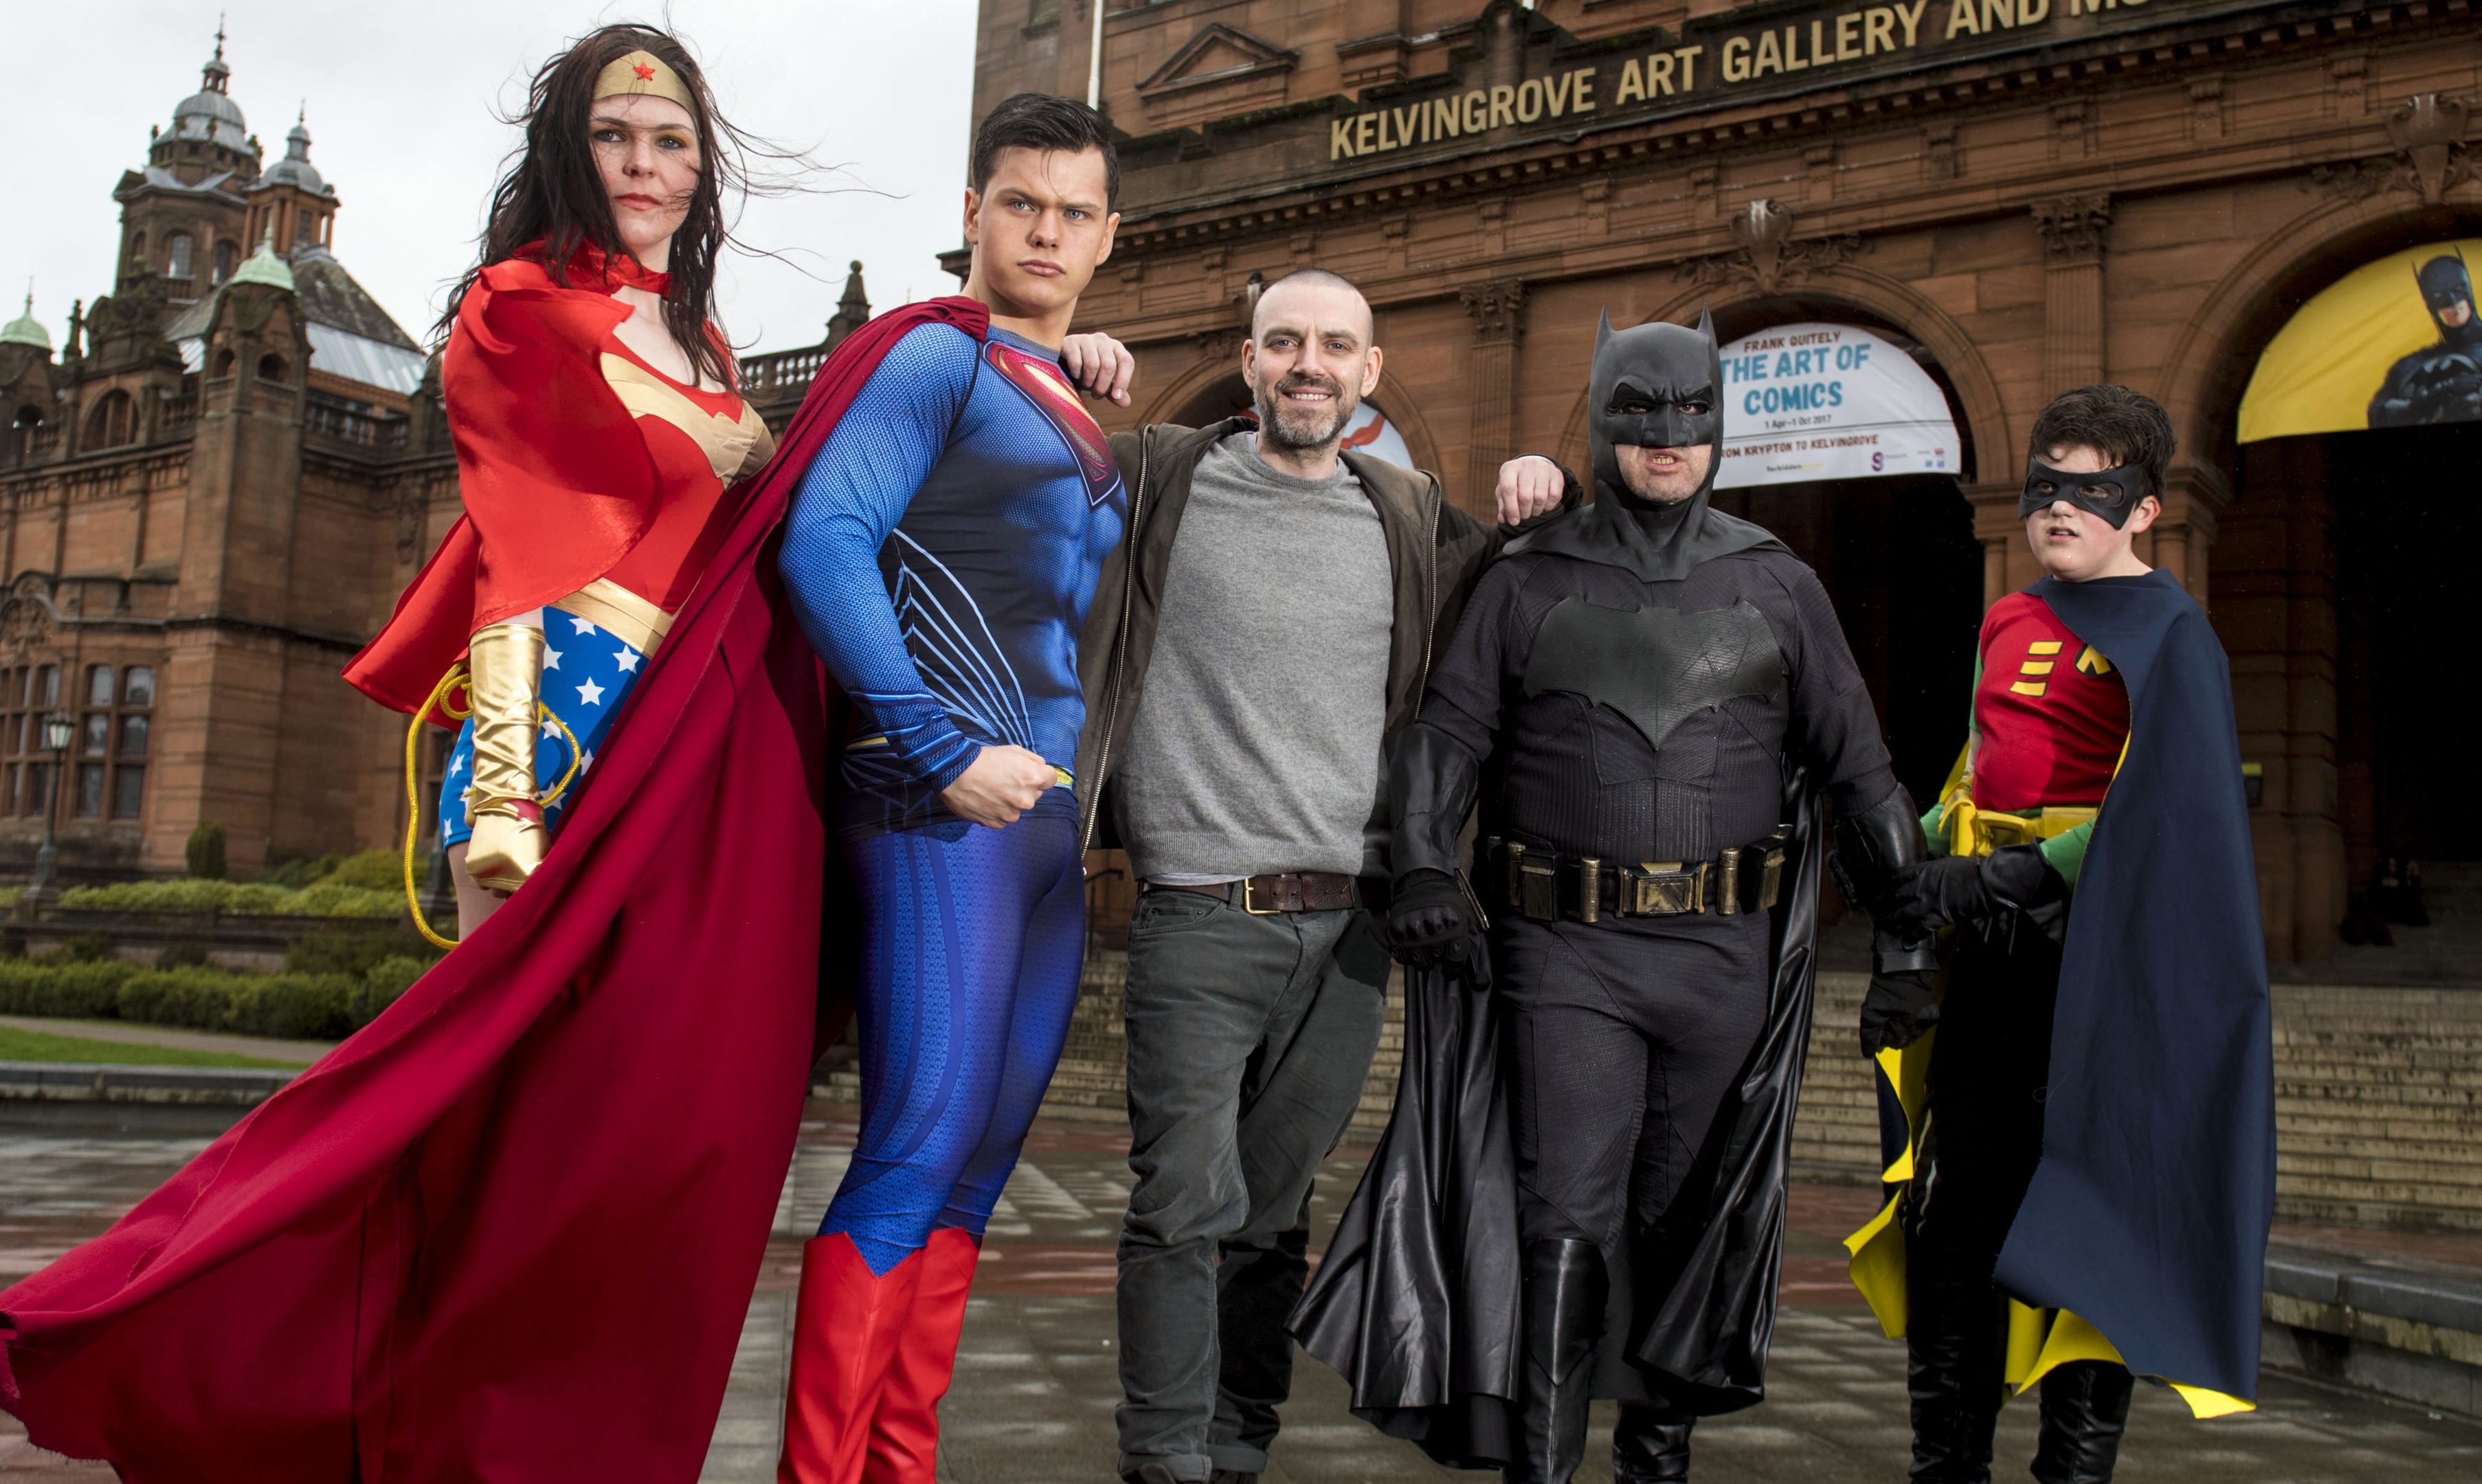 Glasgow born artist Frank Quitely is joined by Superman, Batman and Robin and Wonder Woman as they launch the exhibition (SNS Group / Alan Harvey)